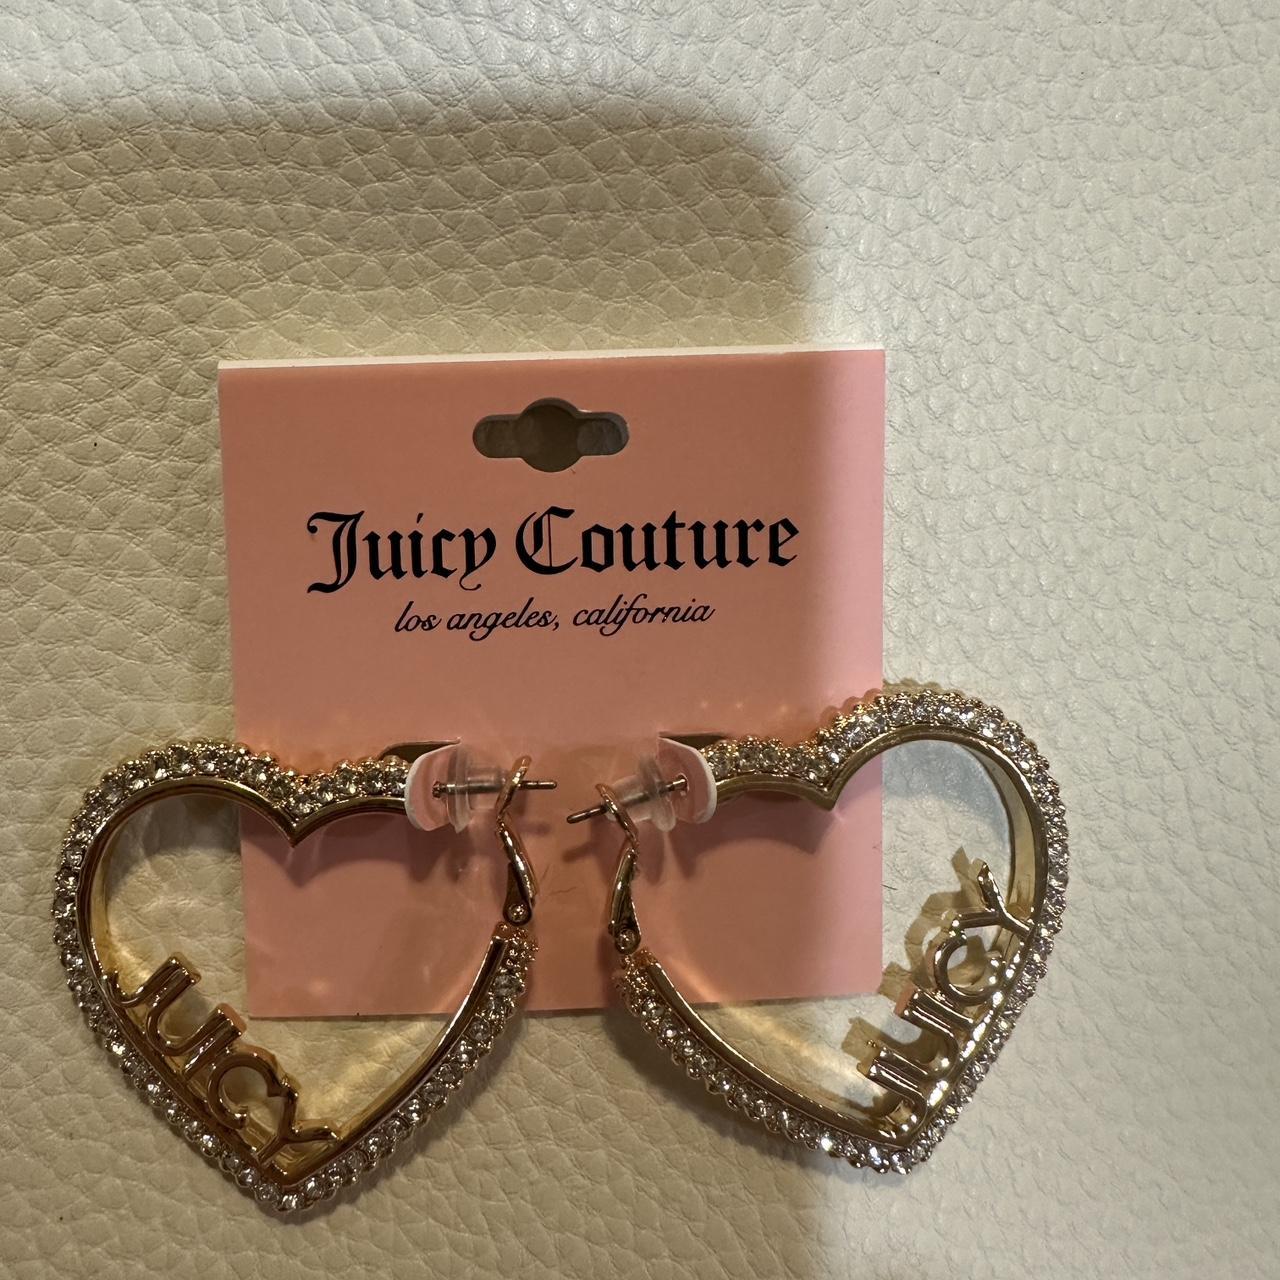 🎀Juicy couture necklace + earring set🎀 Gold juicy - Depop